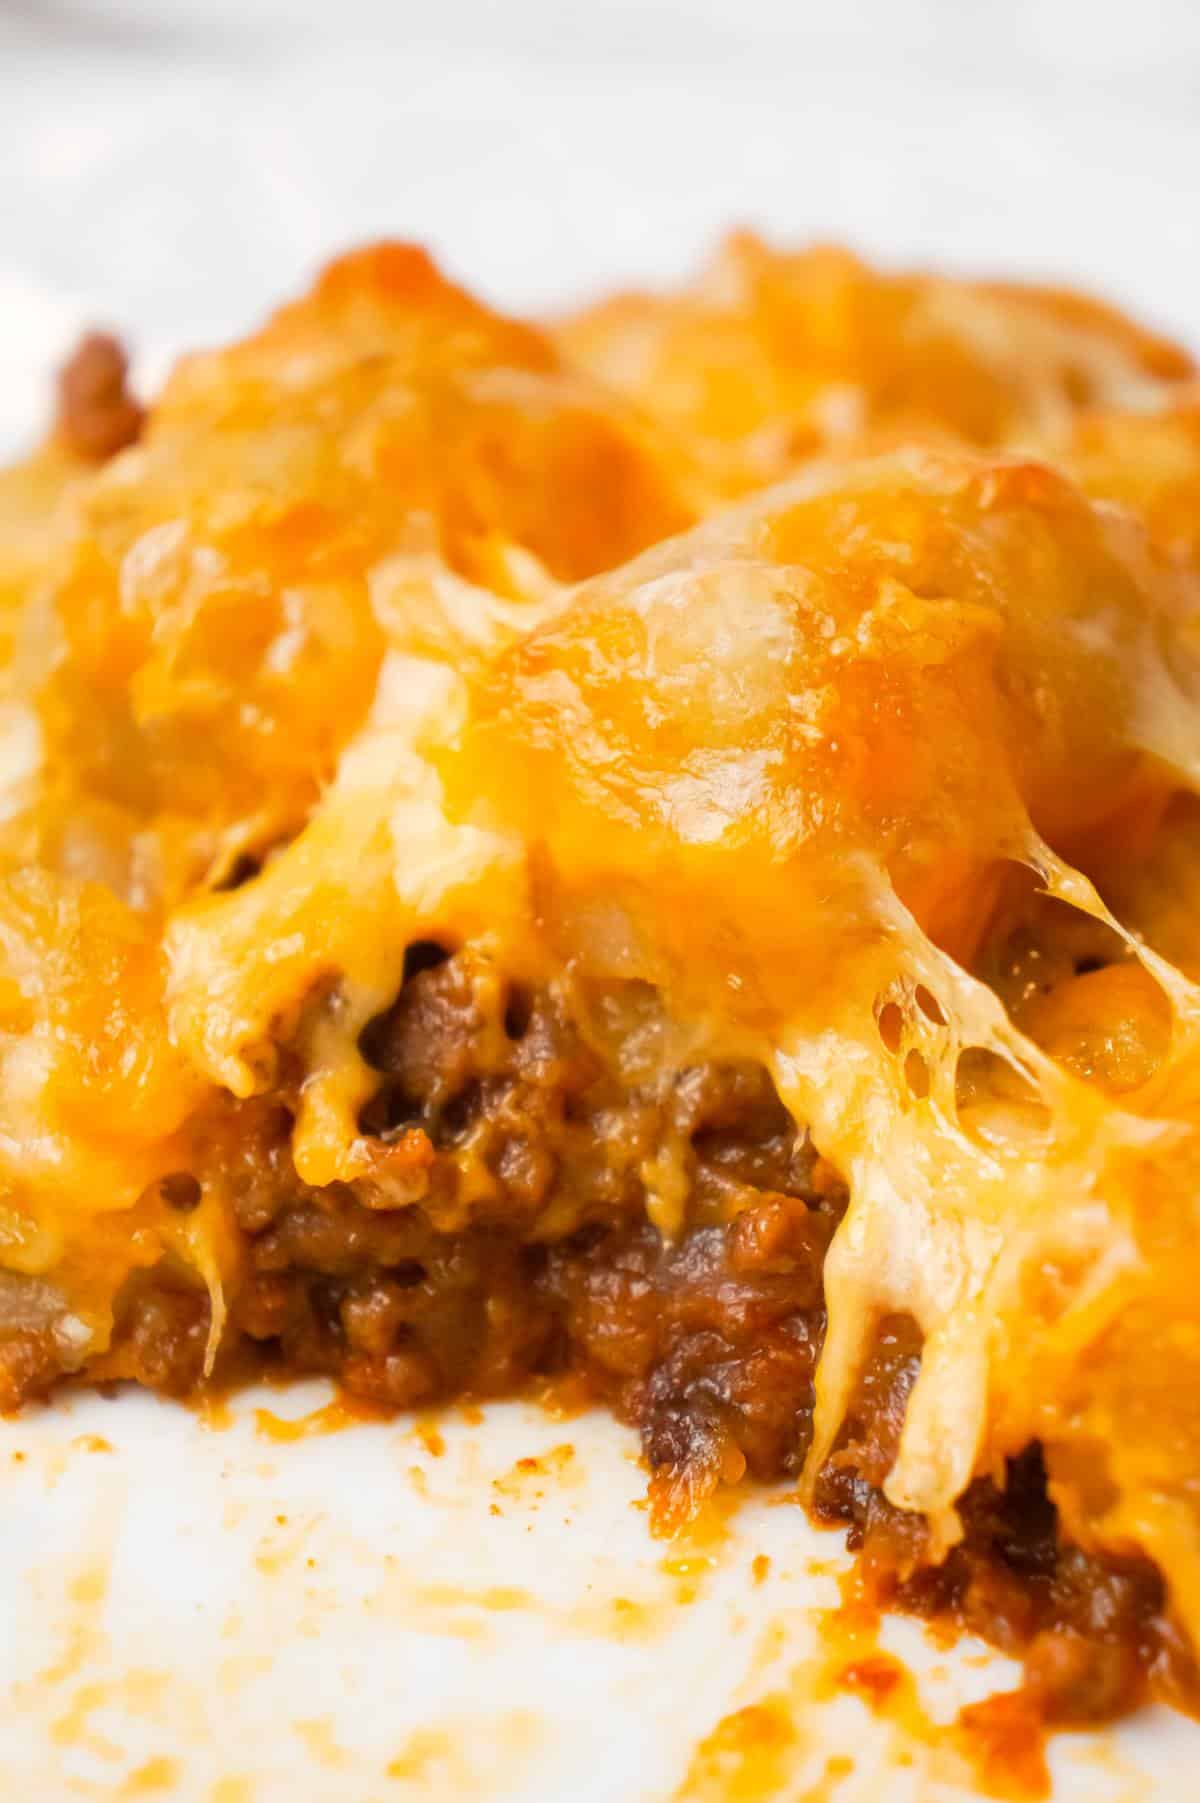 Sloppy Joe Tater Tot Casserole is an easy dinner recipe with a ground beef sloppy joe base, topped with cheese and tater tots.